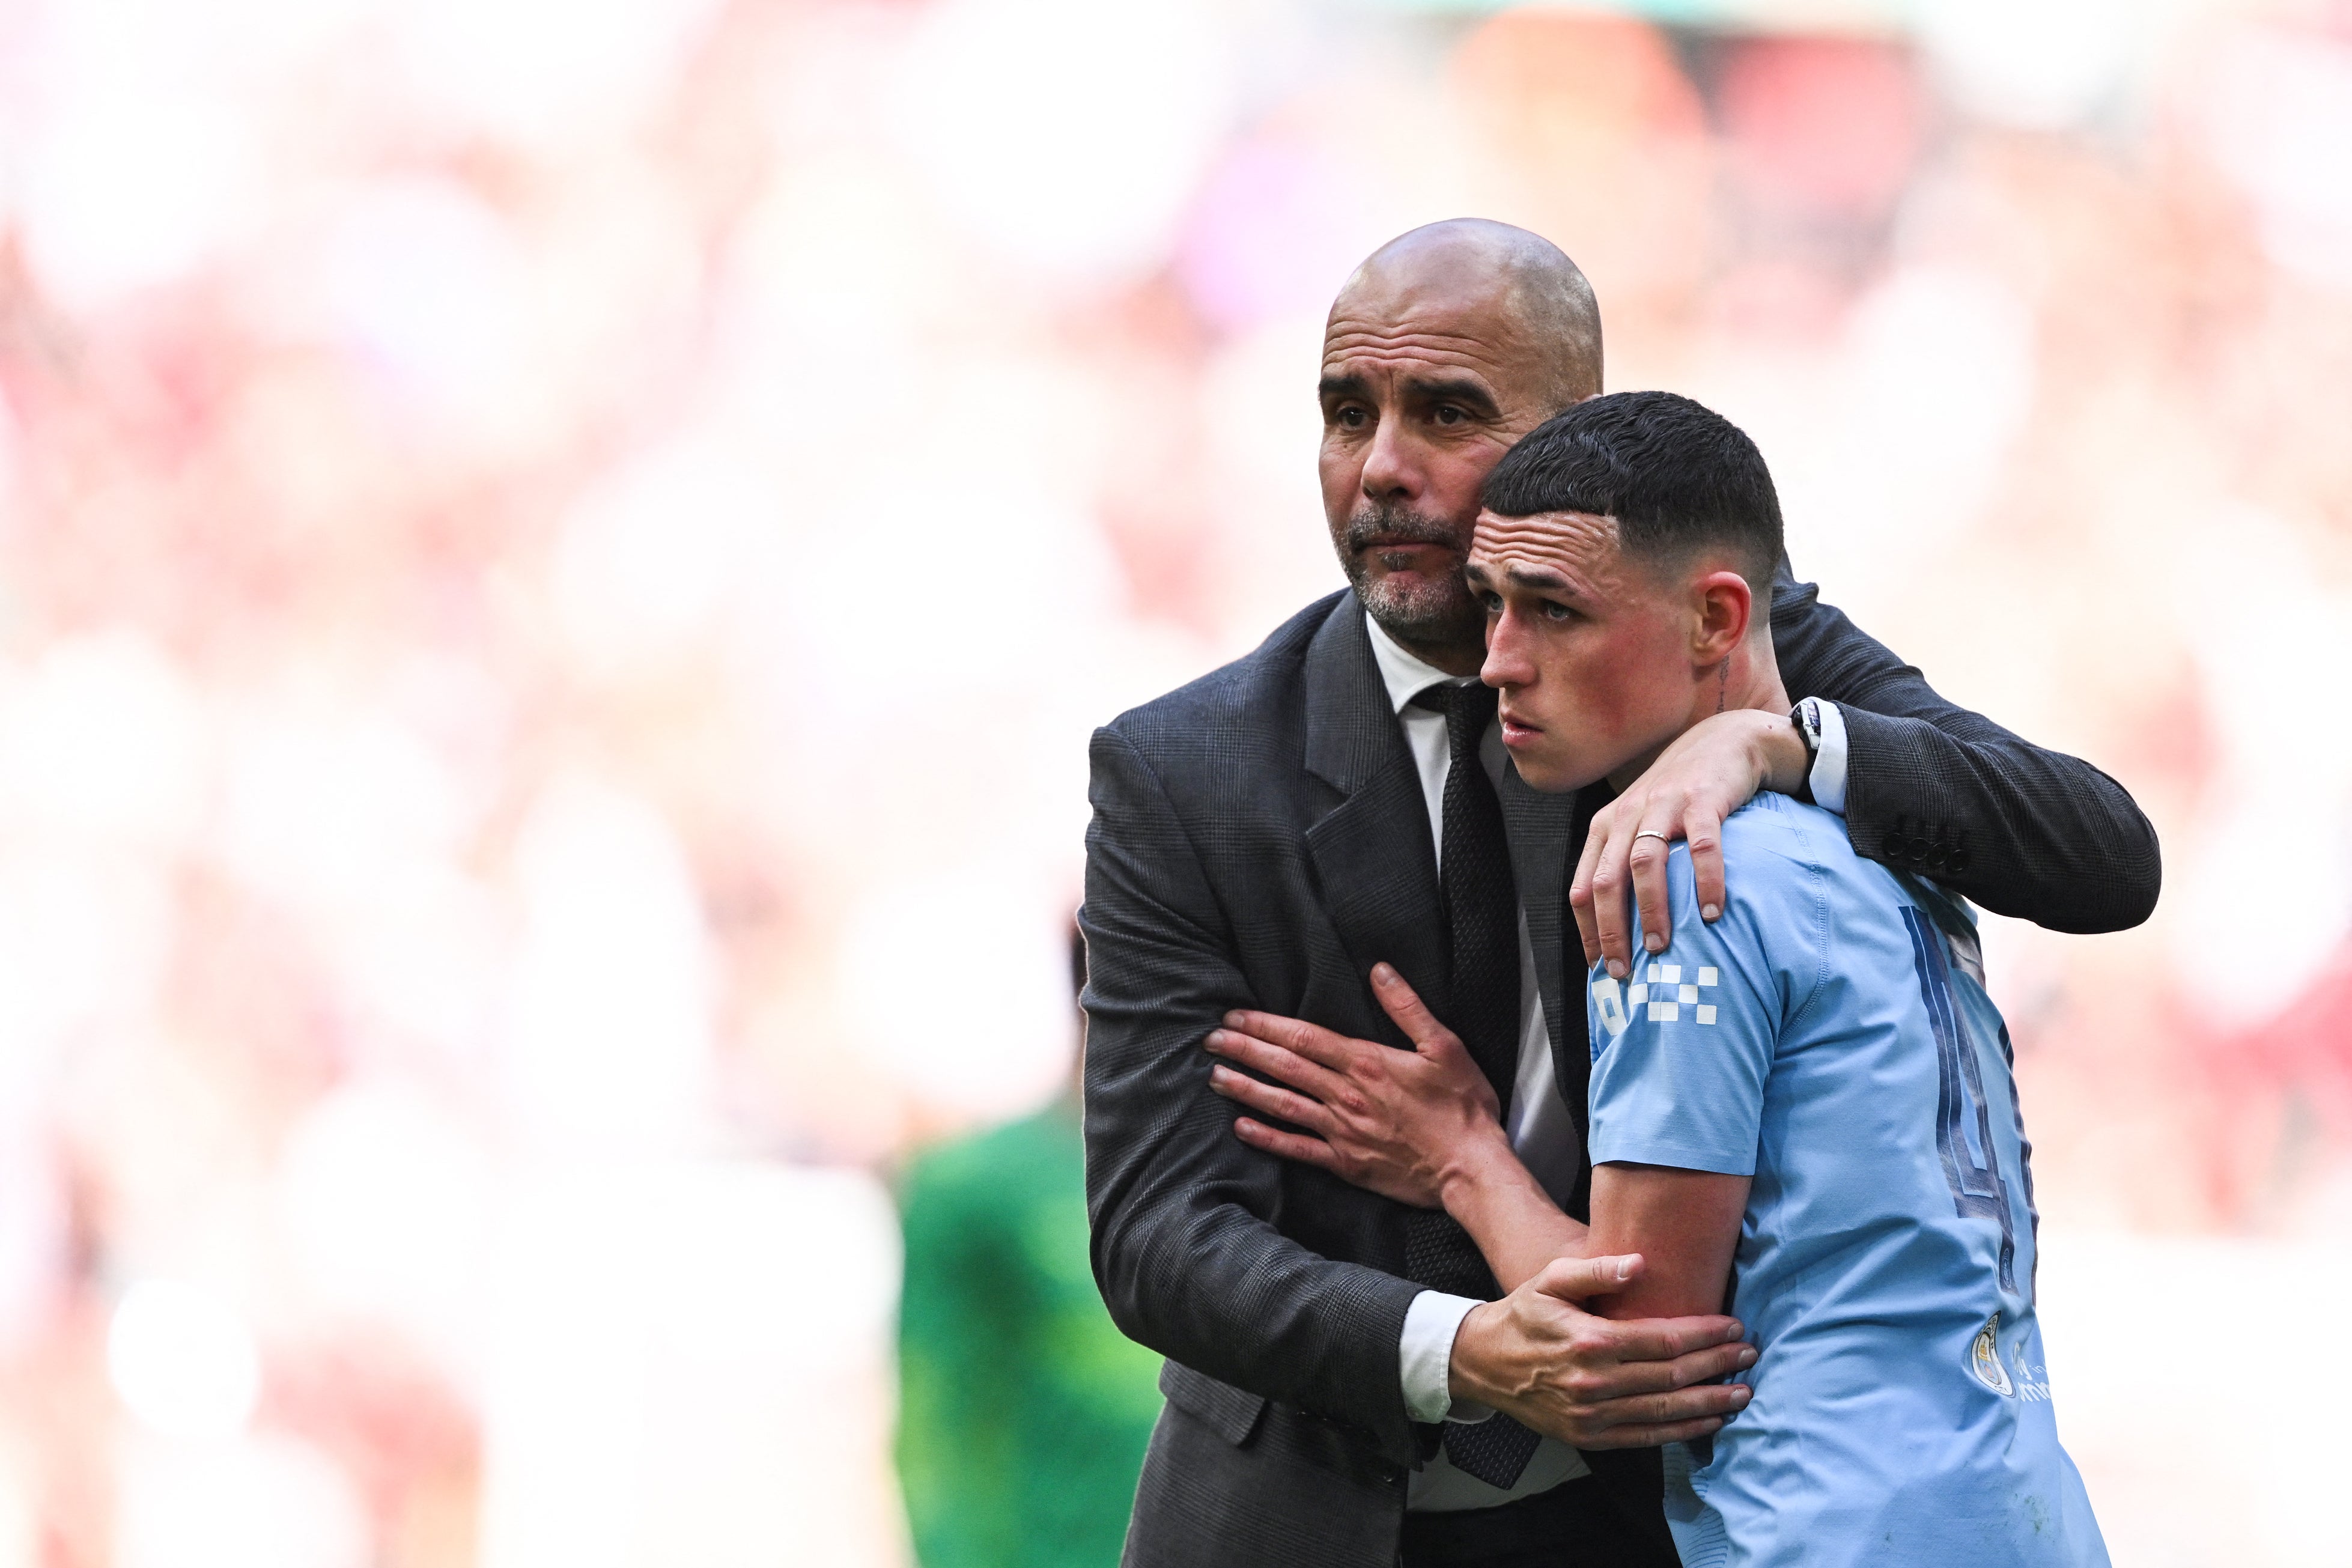 Pep Guardiola consoles Phil Foden after defeat in the Cup final